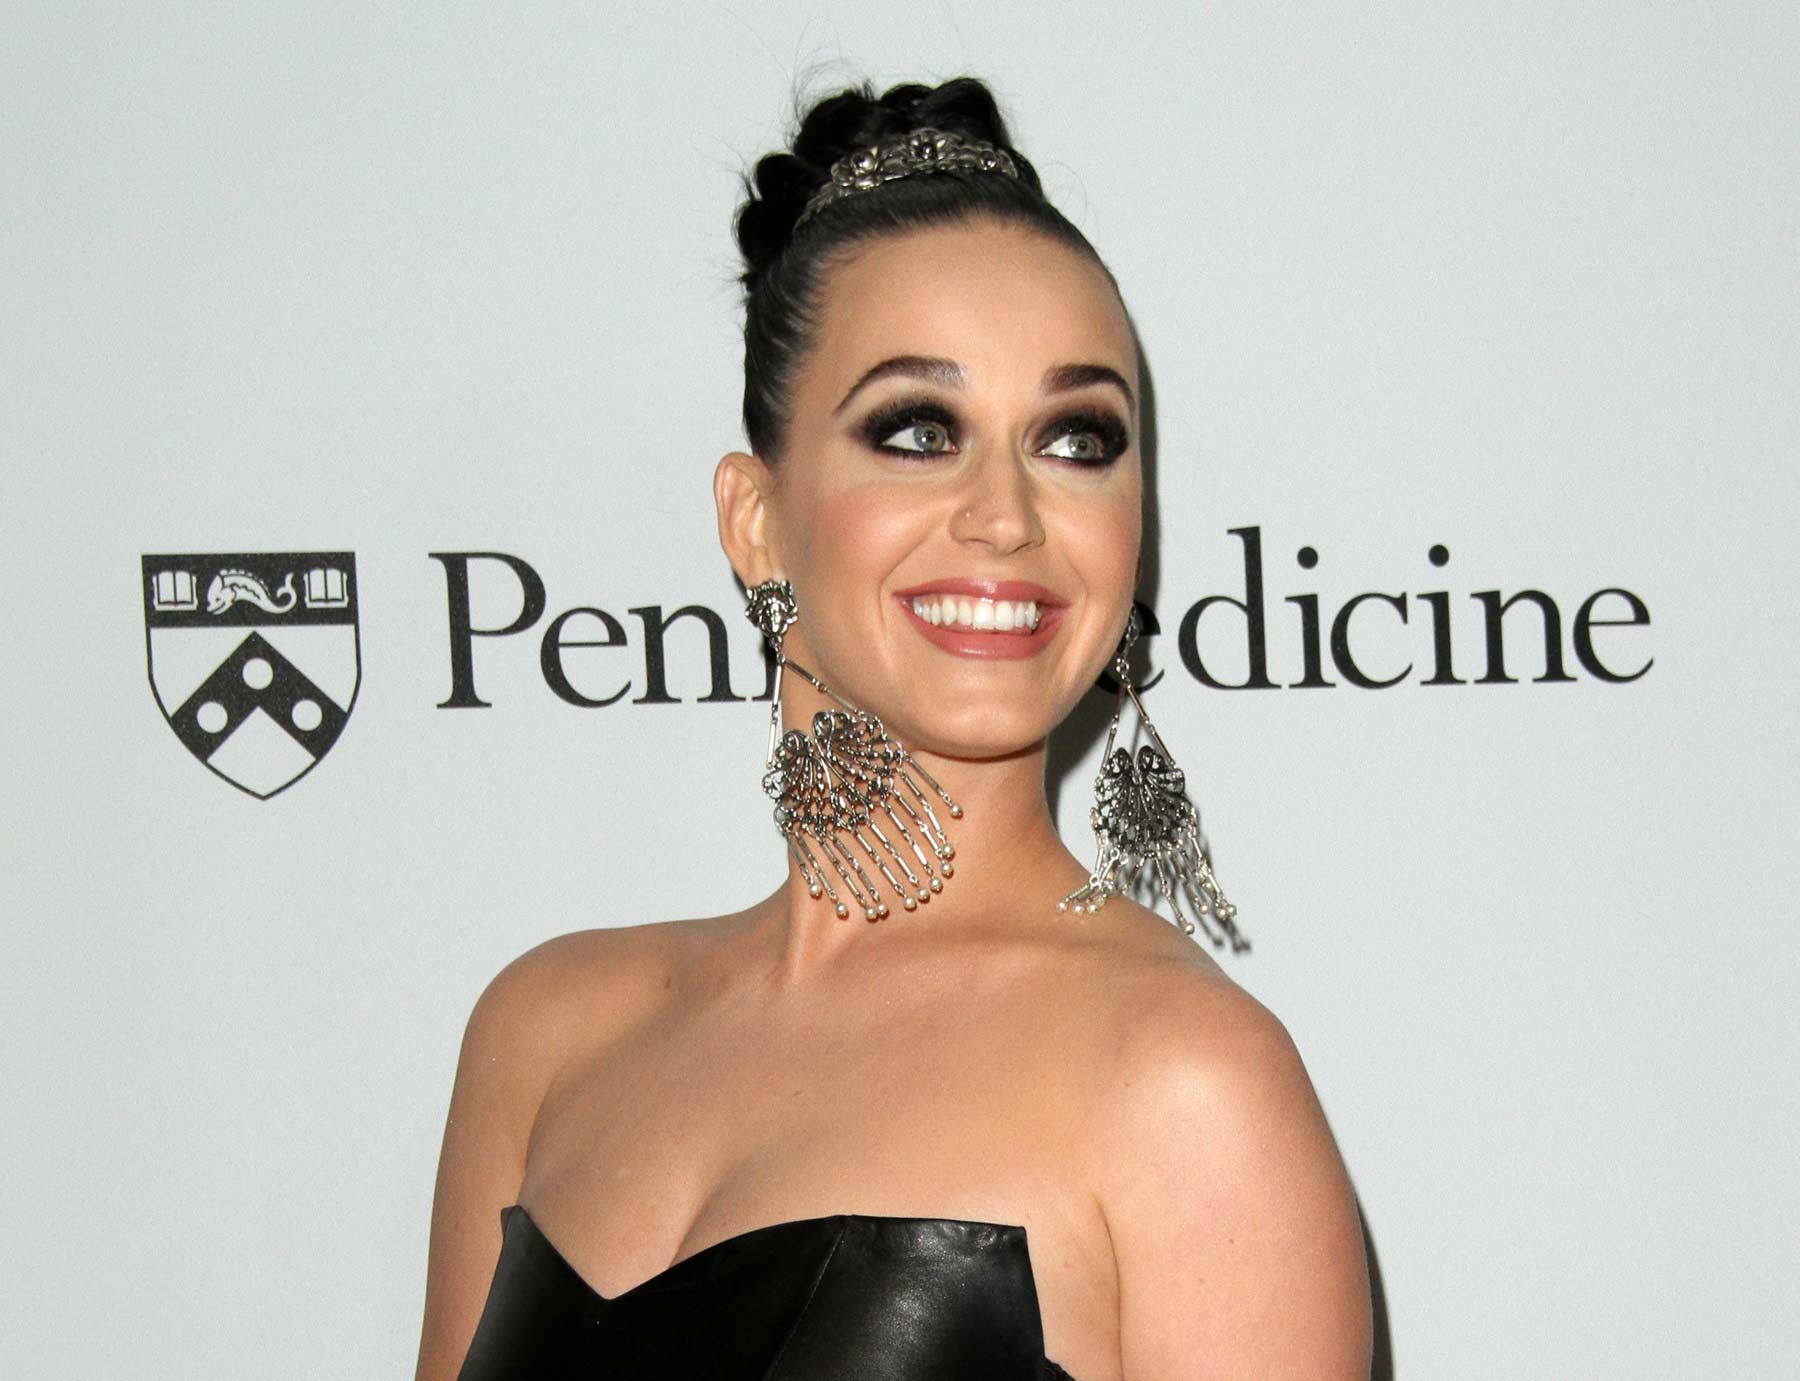 Katy Perry attends The Parker Institute For Cancer Immunotherapy Launch Gala